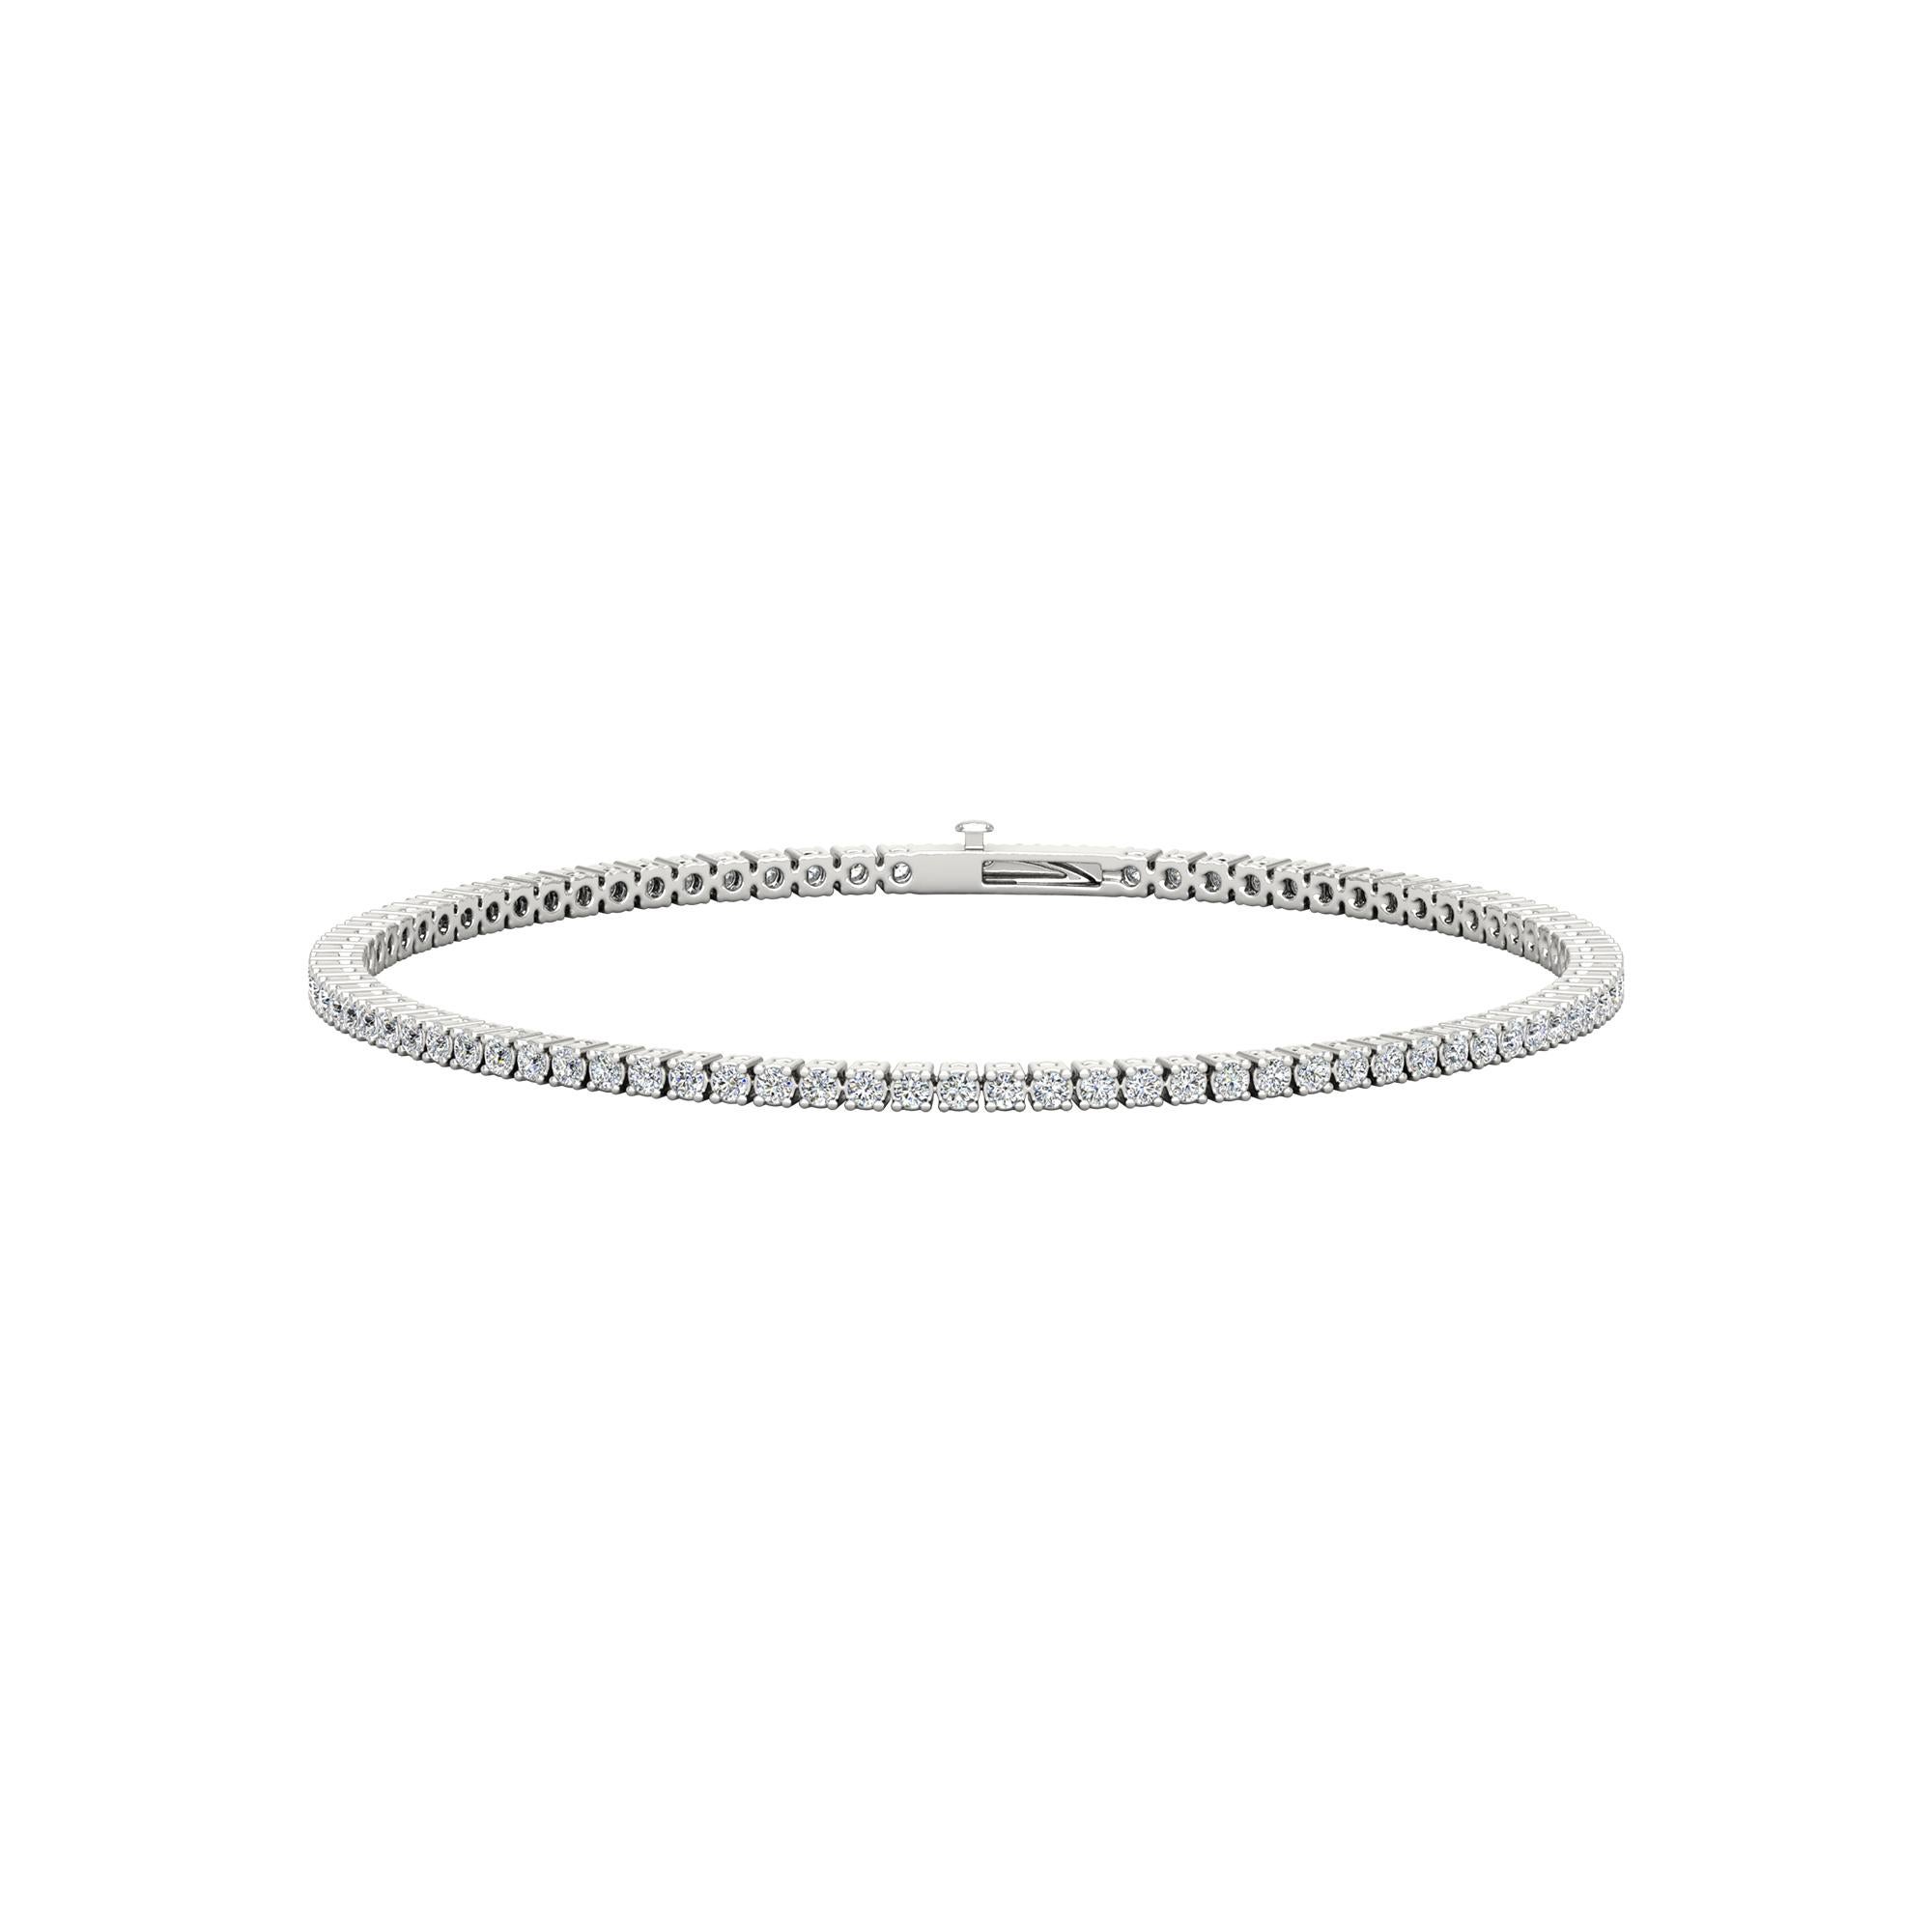 Make your outfit sparkle with this tennis bracelets features beautifully matched round natural diamonds. Elegance for every moment. 

METAL DETAILS: 18K White Gold 
DIAMOND DETAILS: Natural, Ethically sourced &, Conflict free.
DIAMOND SHAPES : 